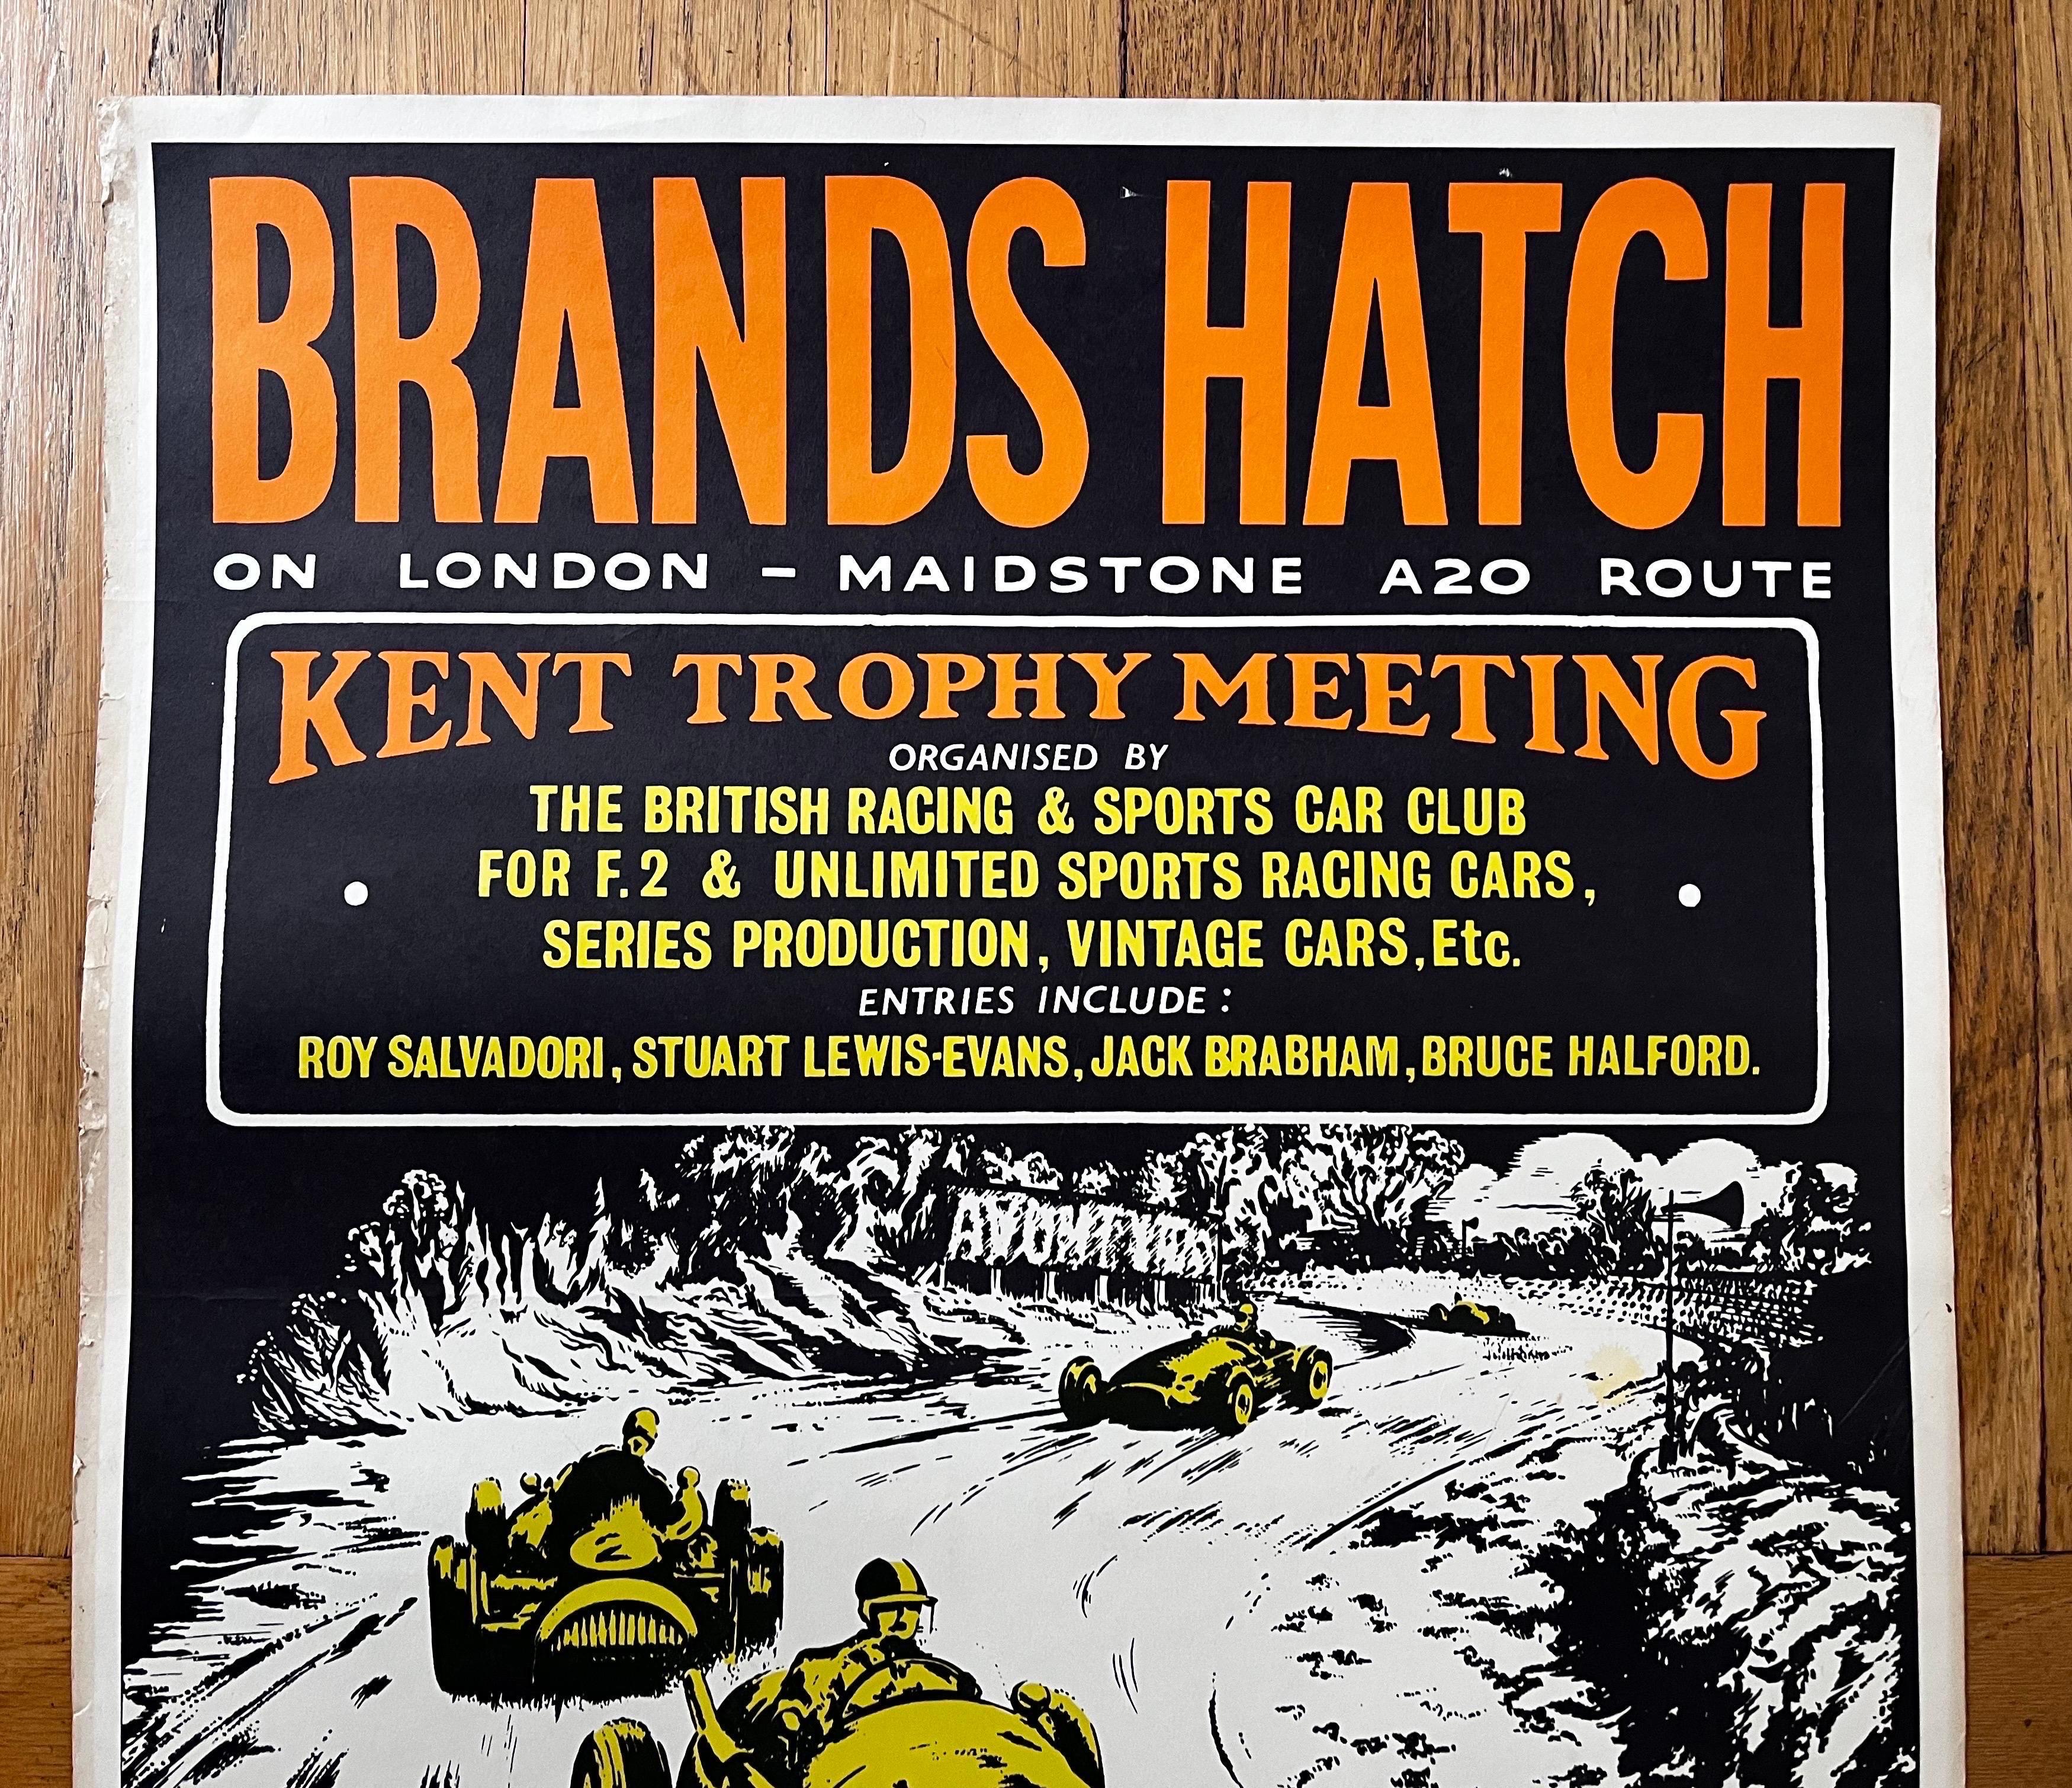 English Vintage Racing Poster
Brands Hatch Motor Racing c. 1956 

some discoloration, wrinkles and folds, etc.

